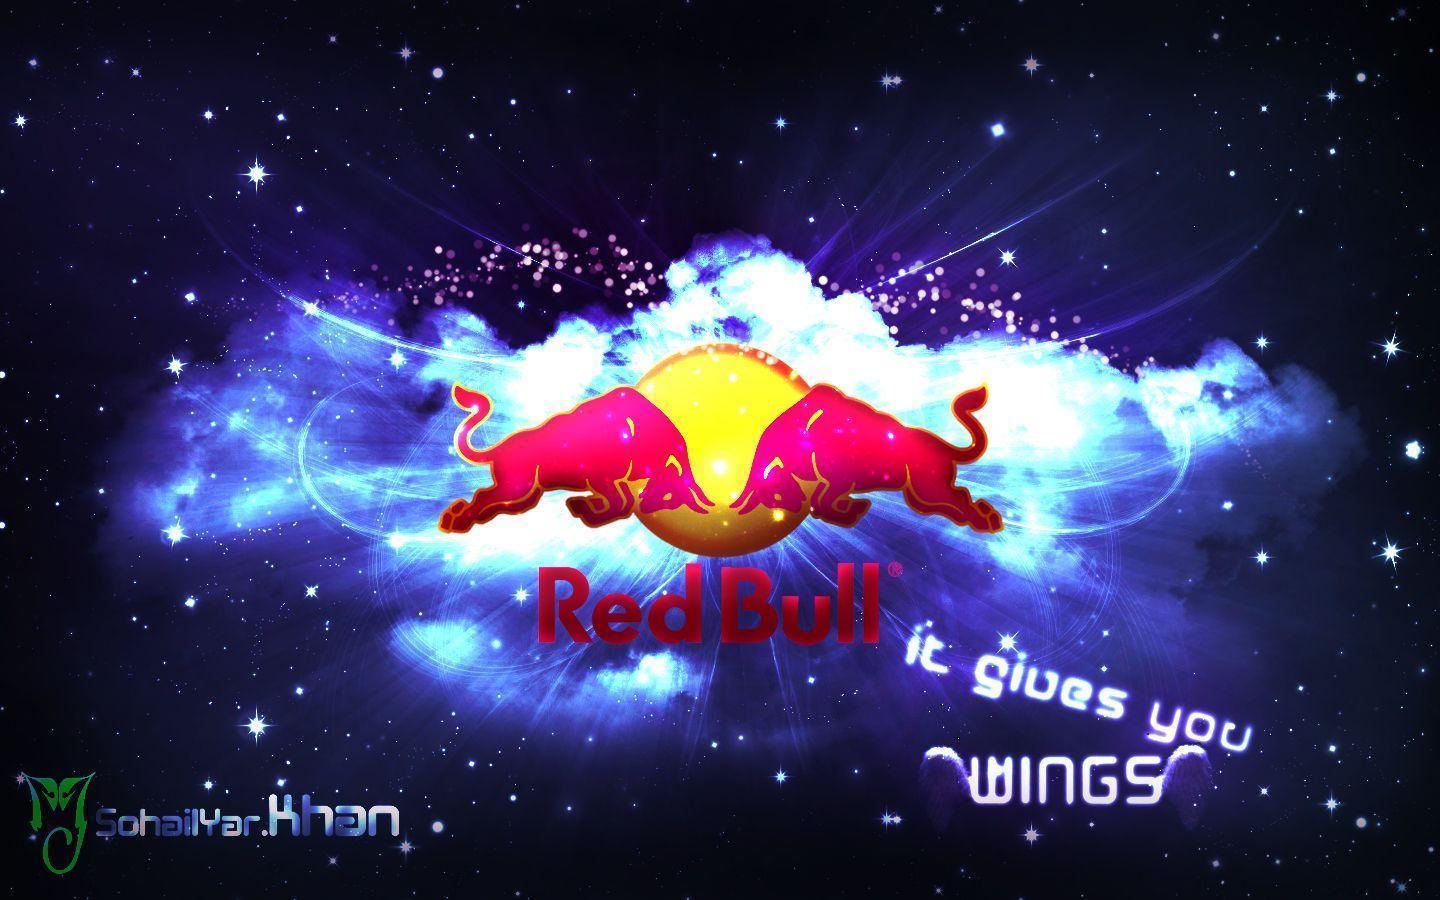 Research: red bull logo